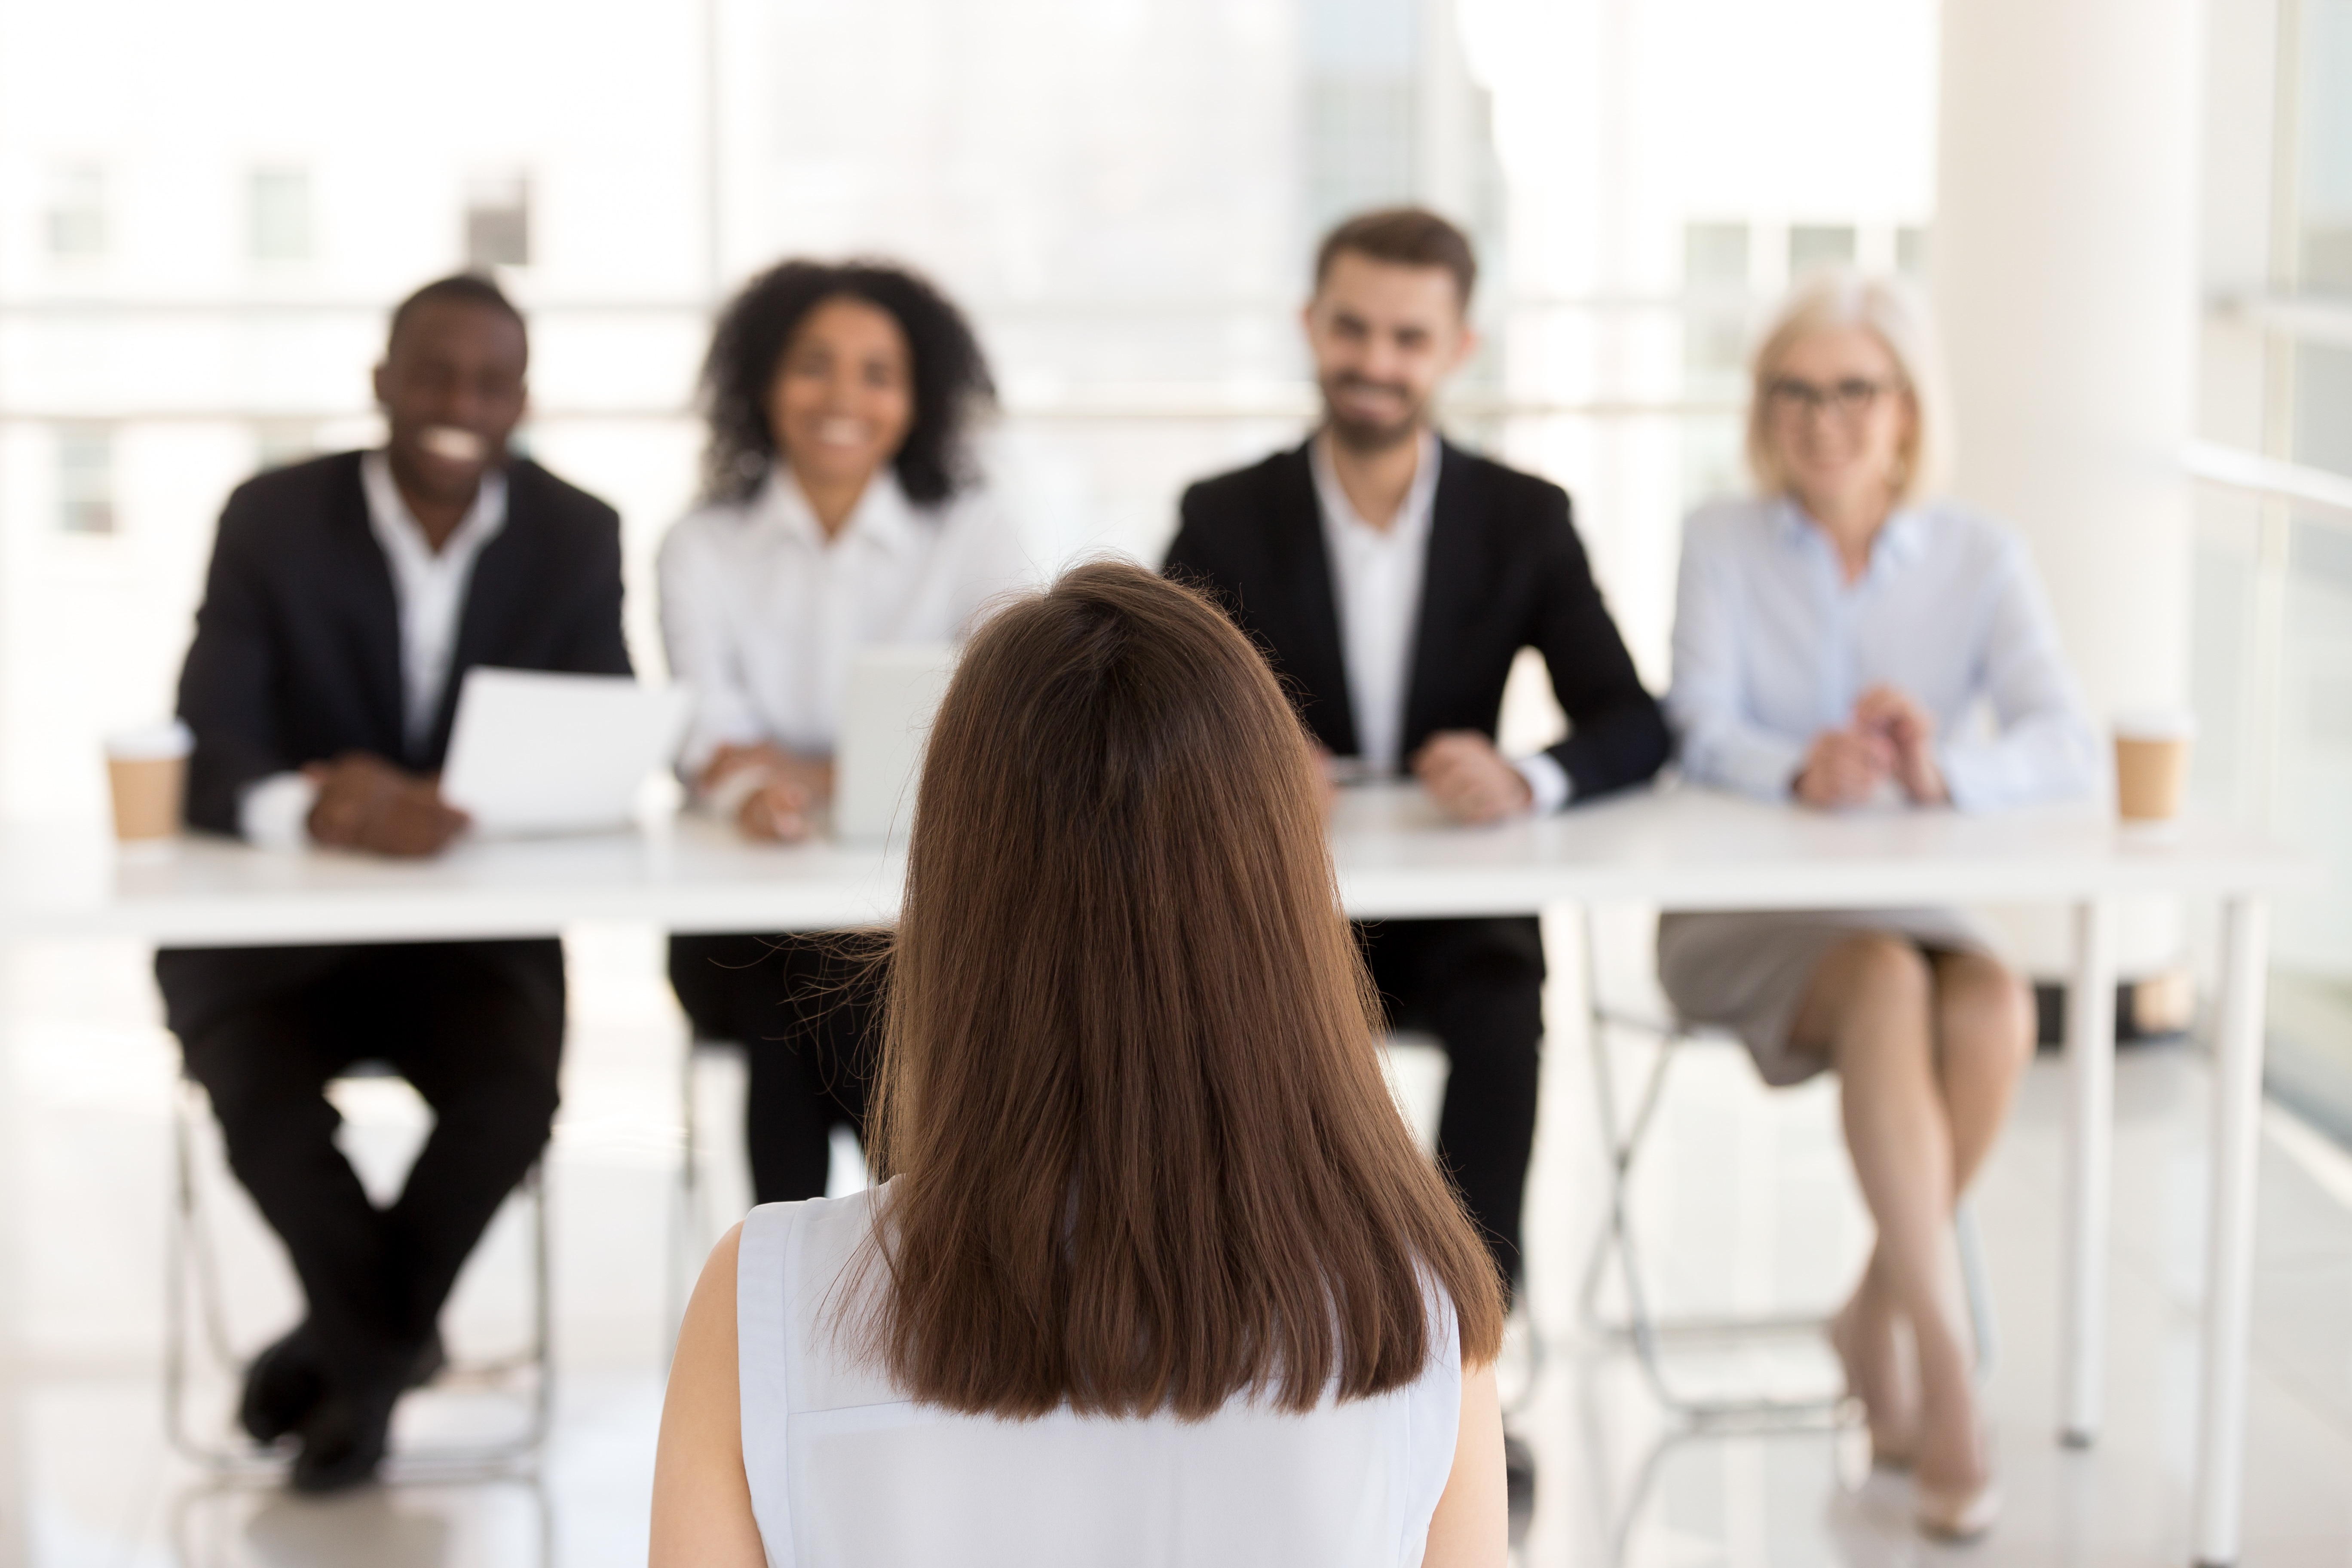  A woman sits with her back to the camera in front of a diverse hiring panel smiling and looking at her.